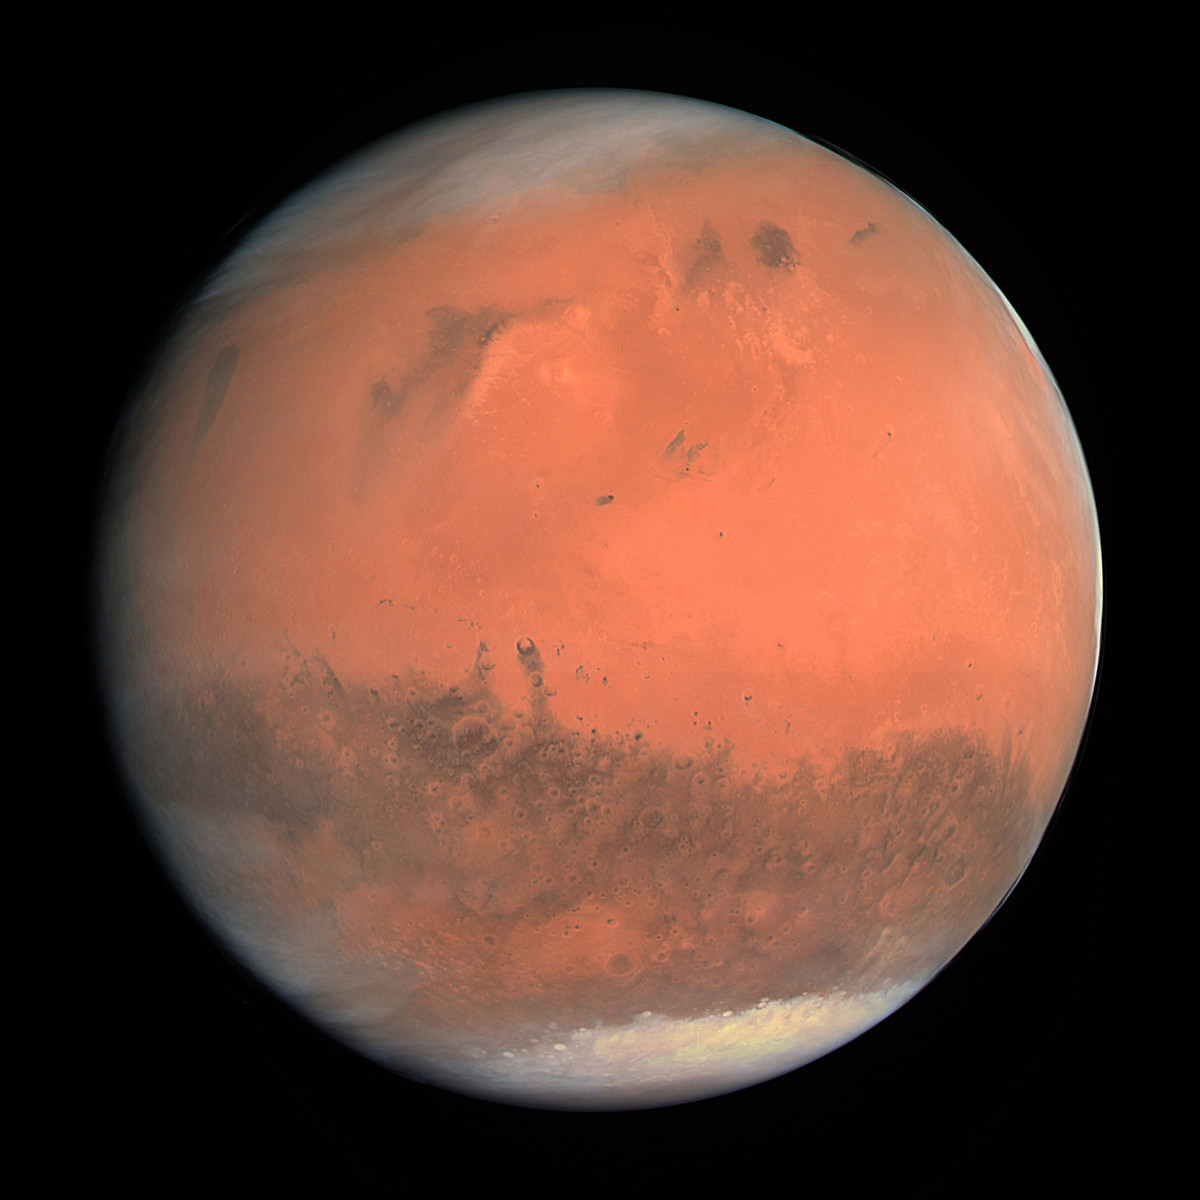 How to Walk on Mars With Google Street View on Your iPhone